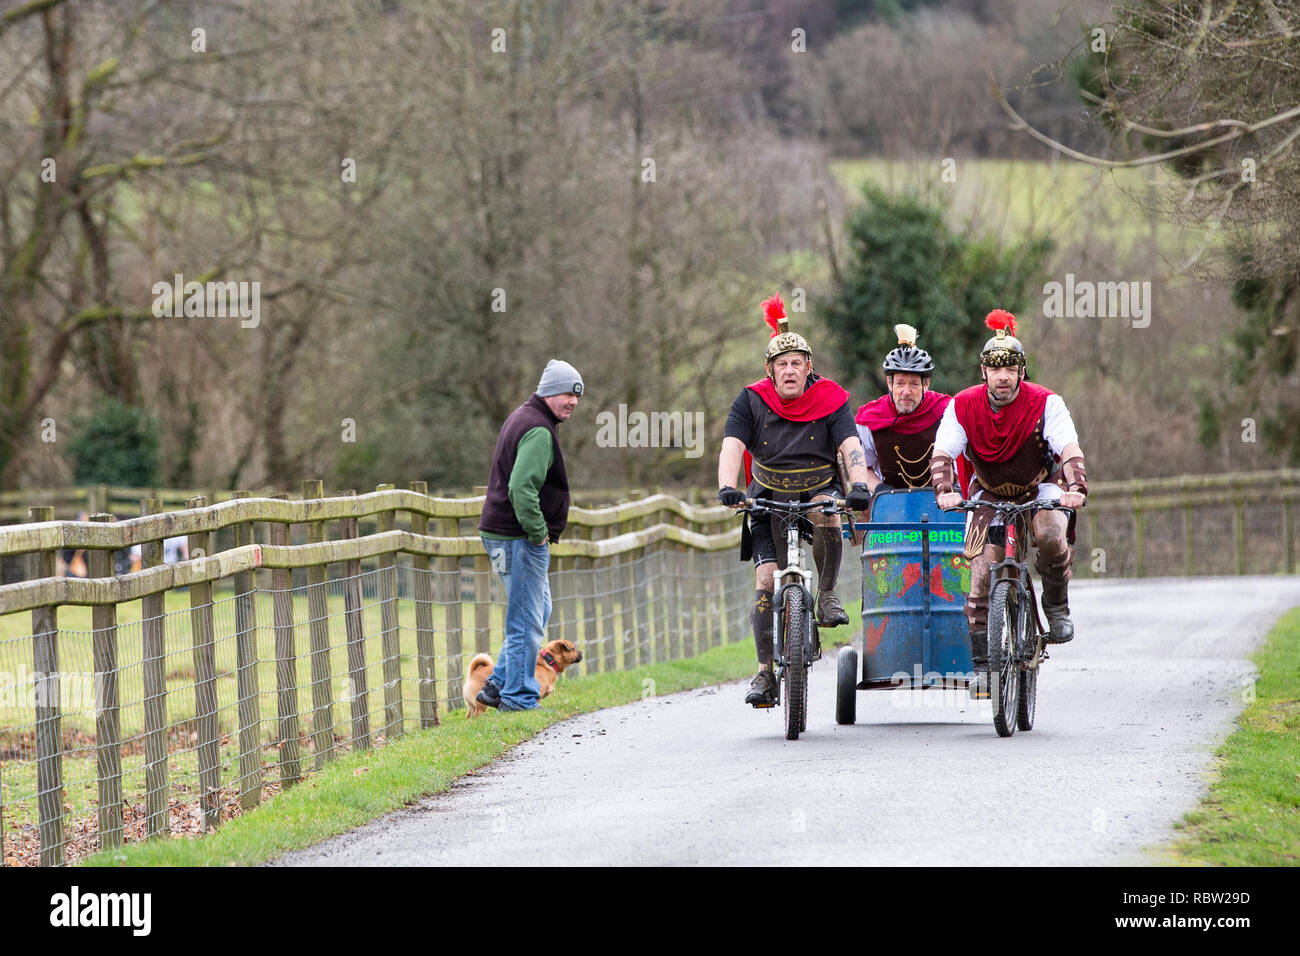 Competitors race mountain bike chariots in the annual Llanwrtyd Wells World Mountain Bike Chariot Race in Powys, Wales. Stock Photo